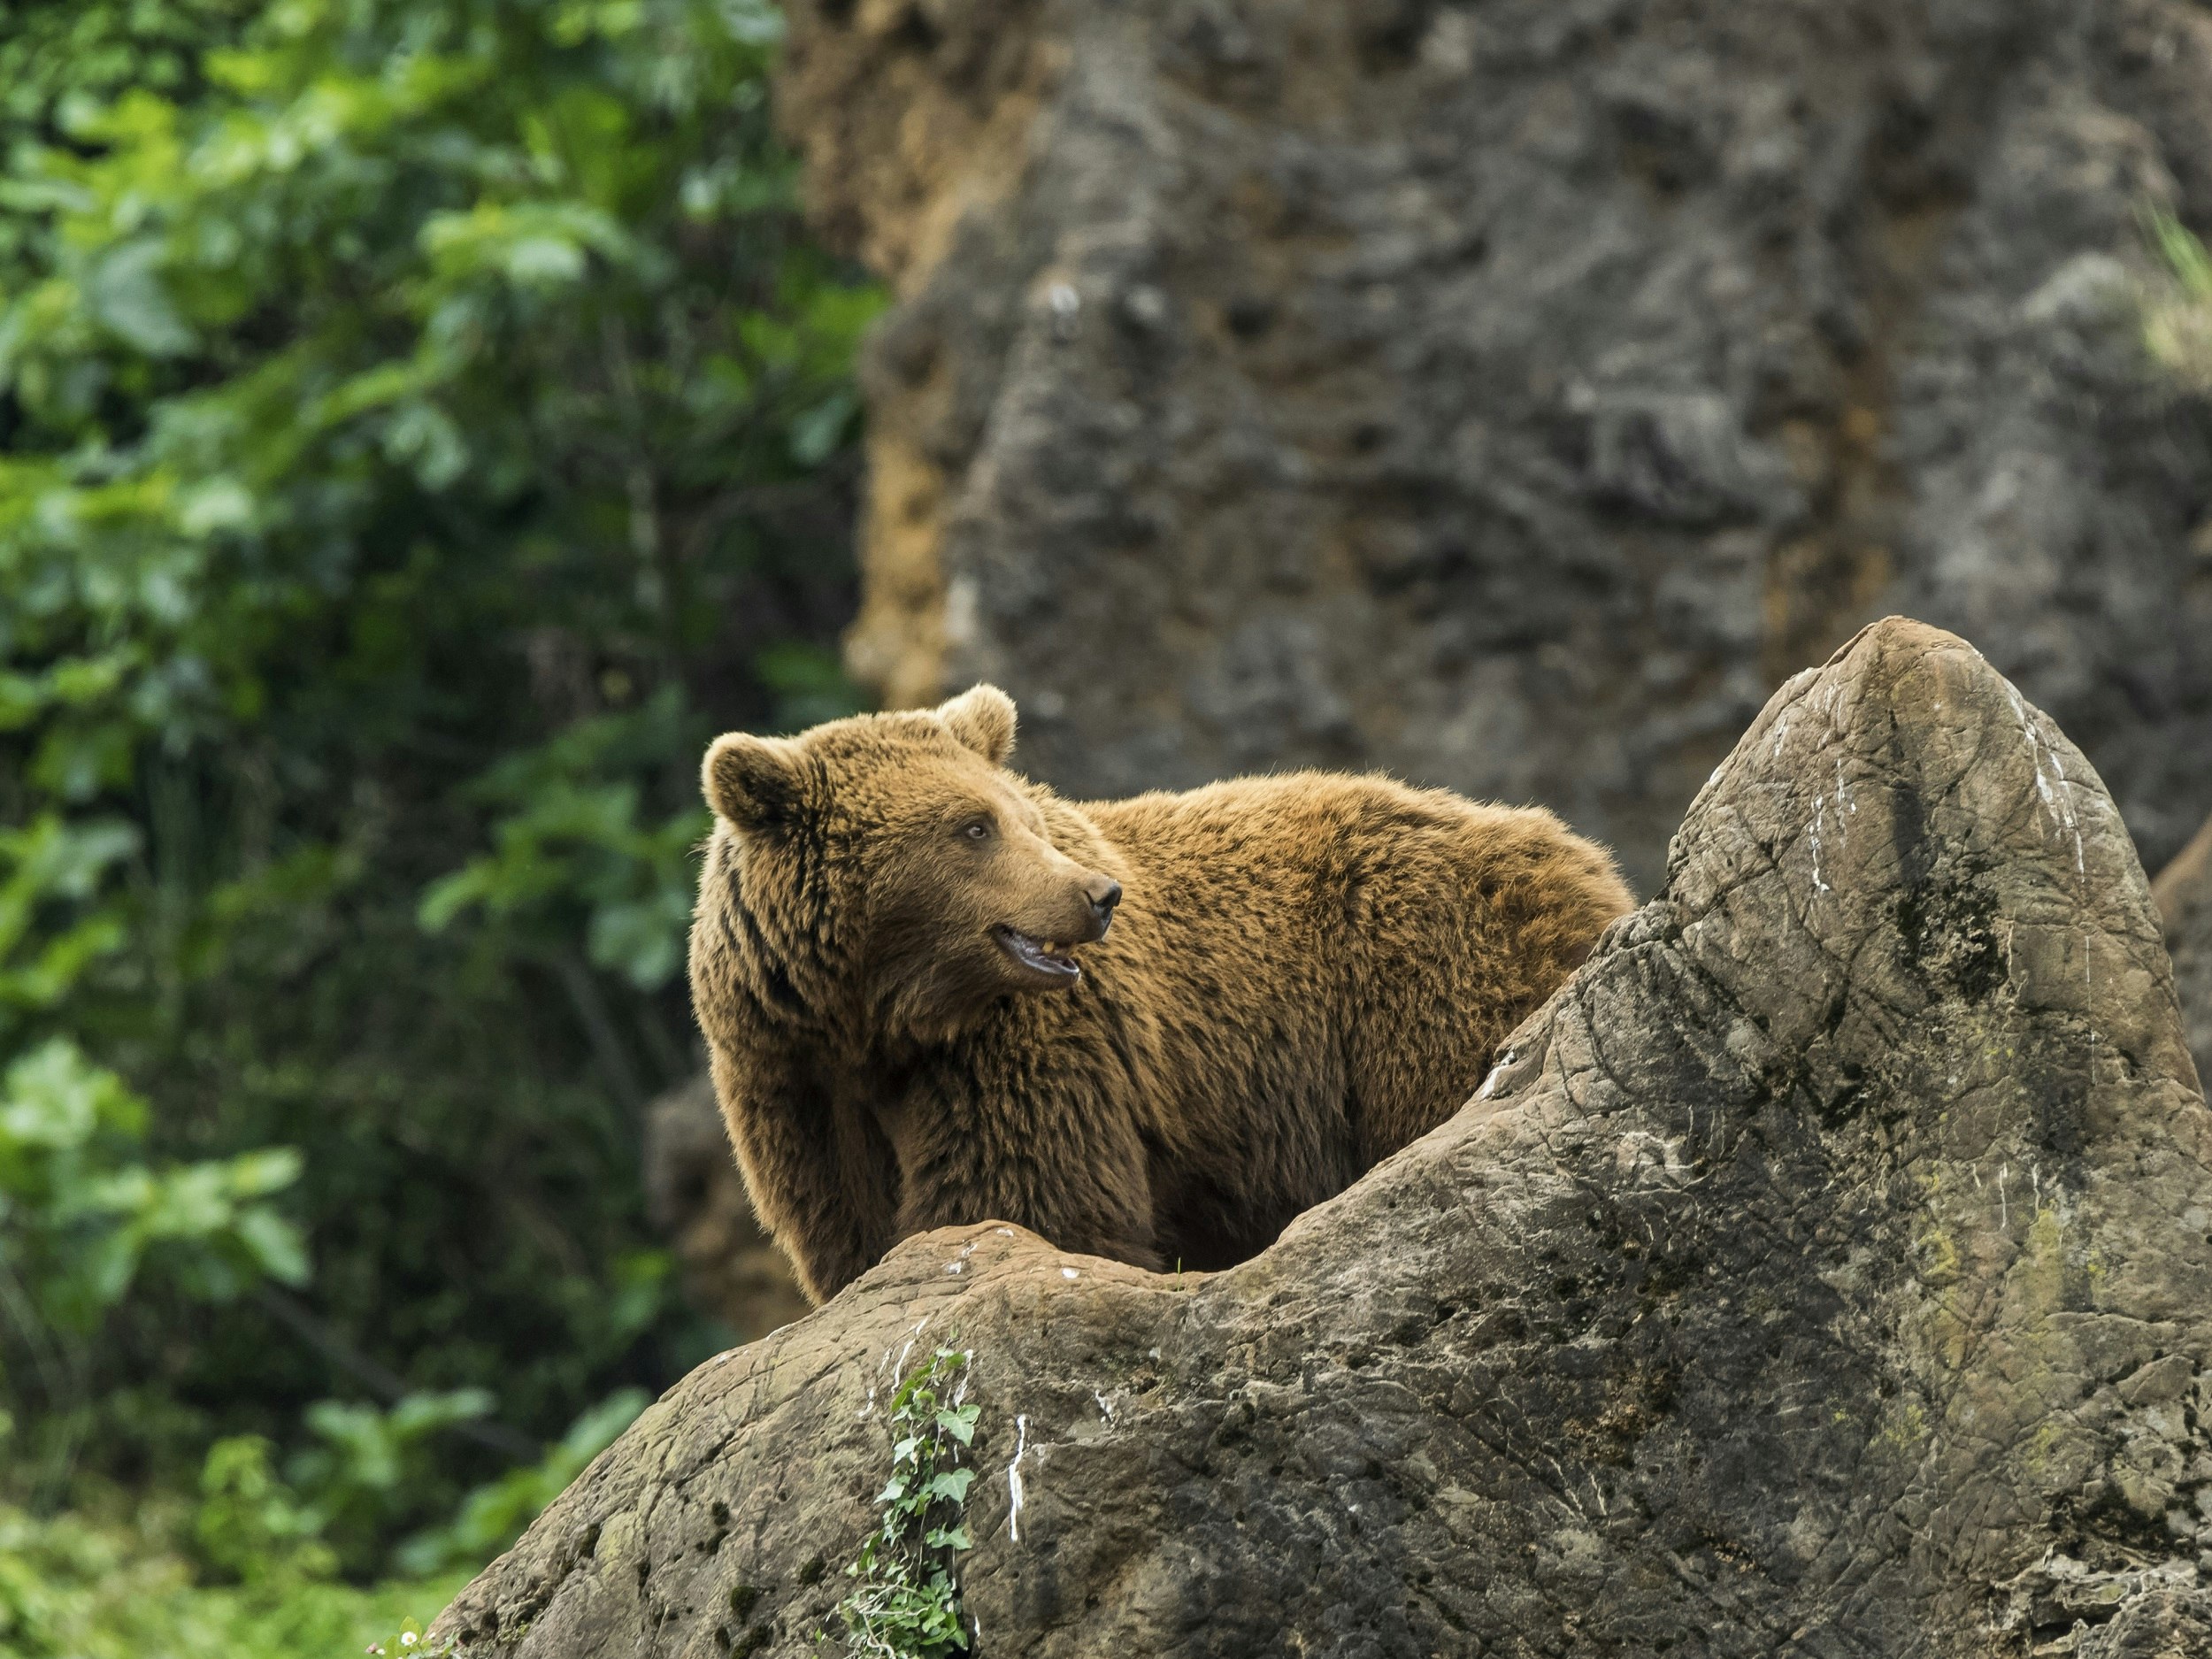 A brown bear looks behind her while standing on a large rock. Her fur is golden brown and tufty all over.